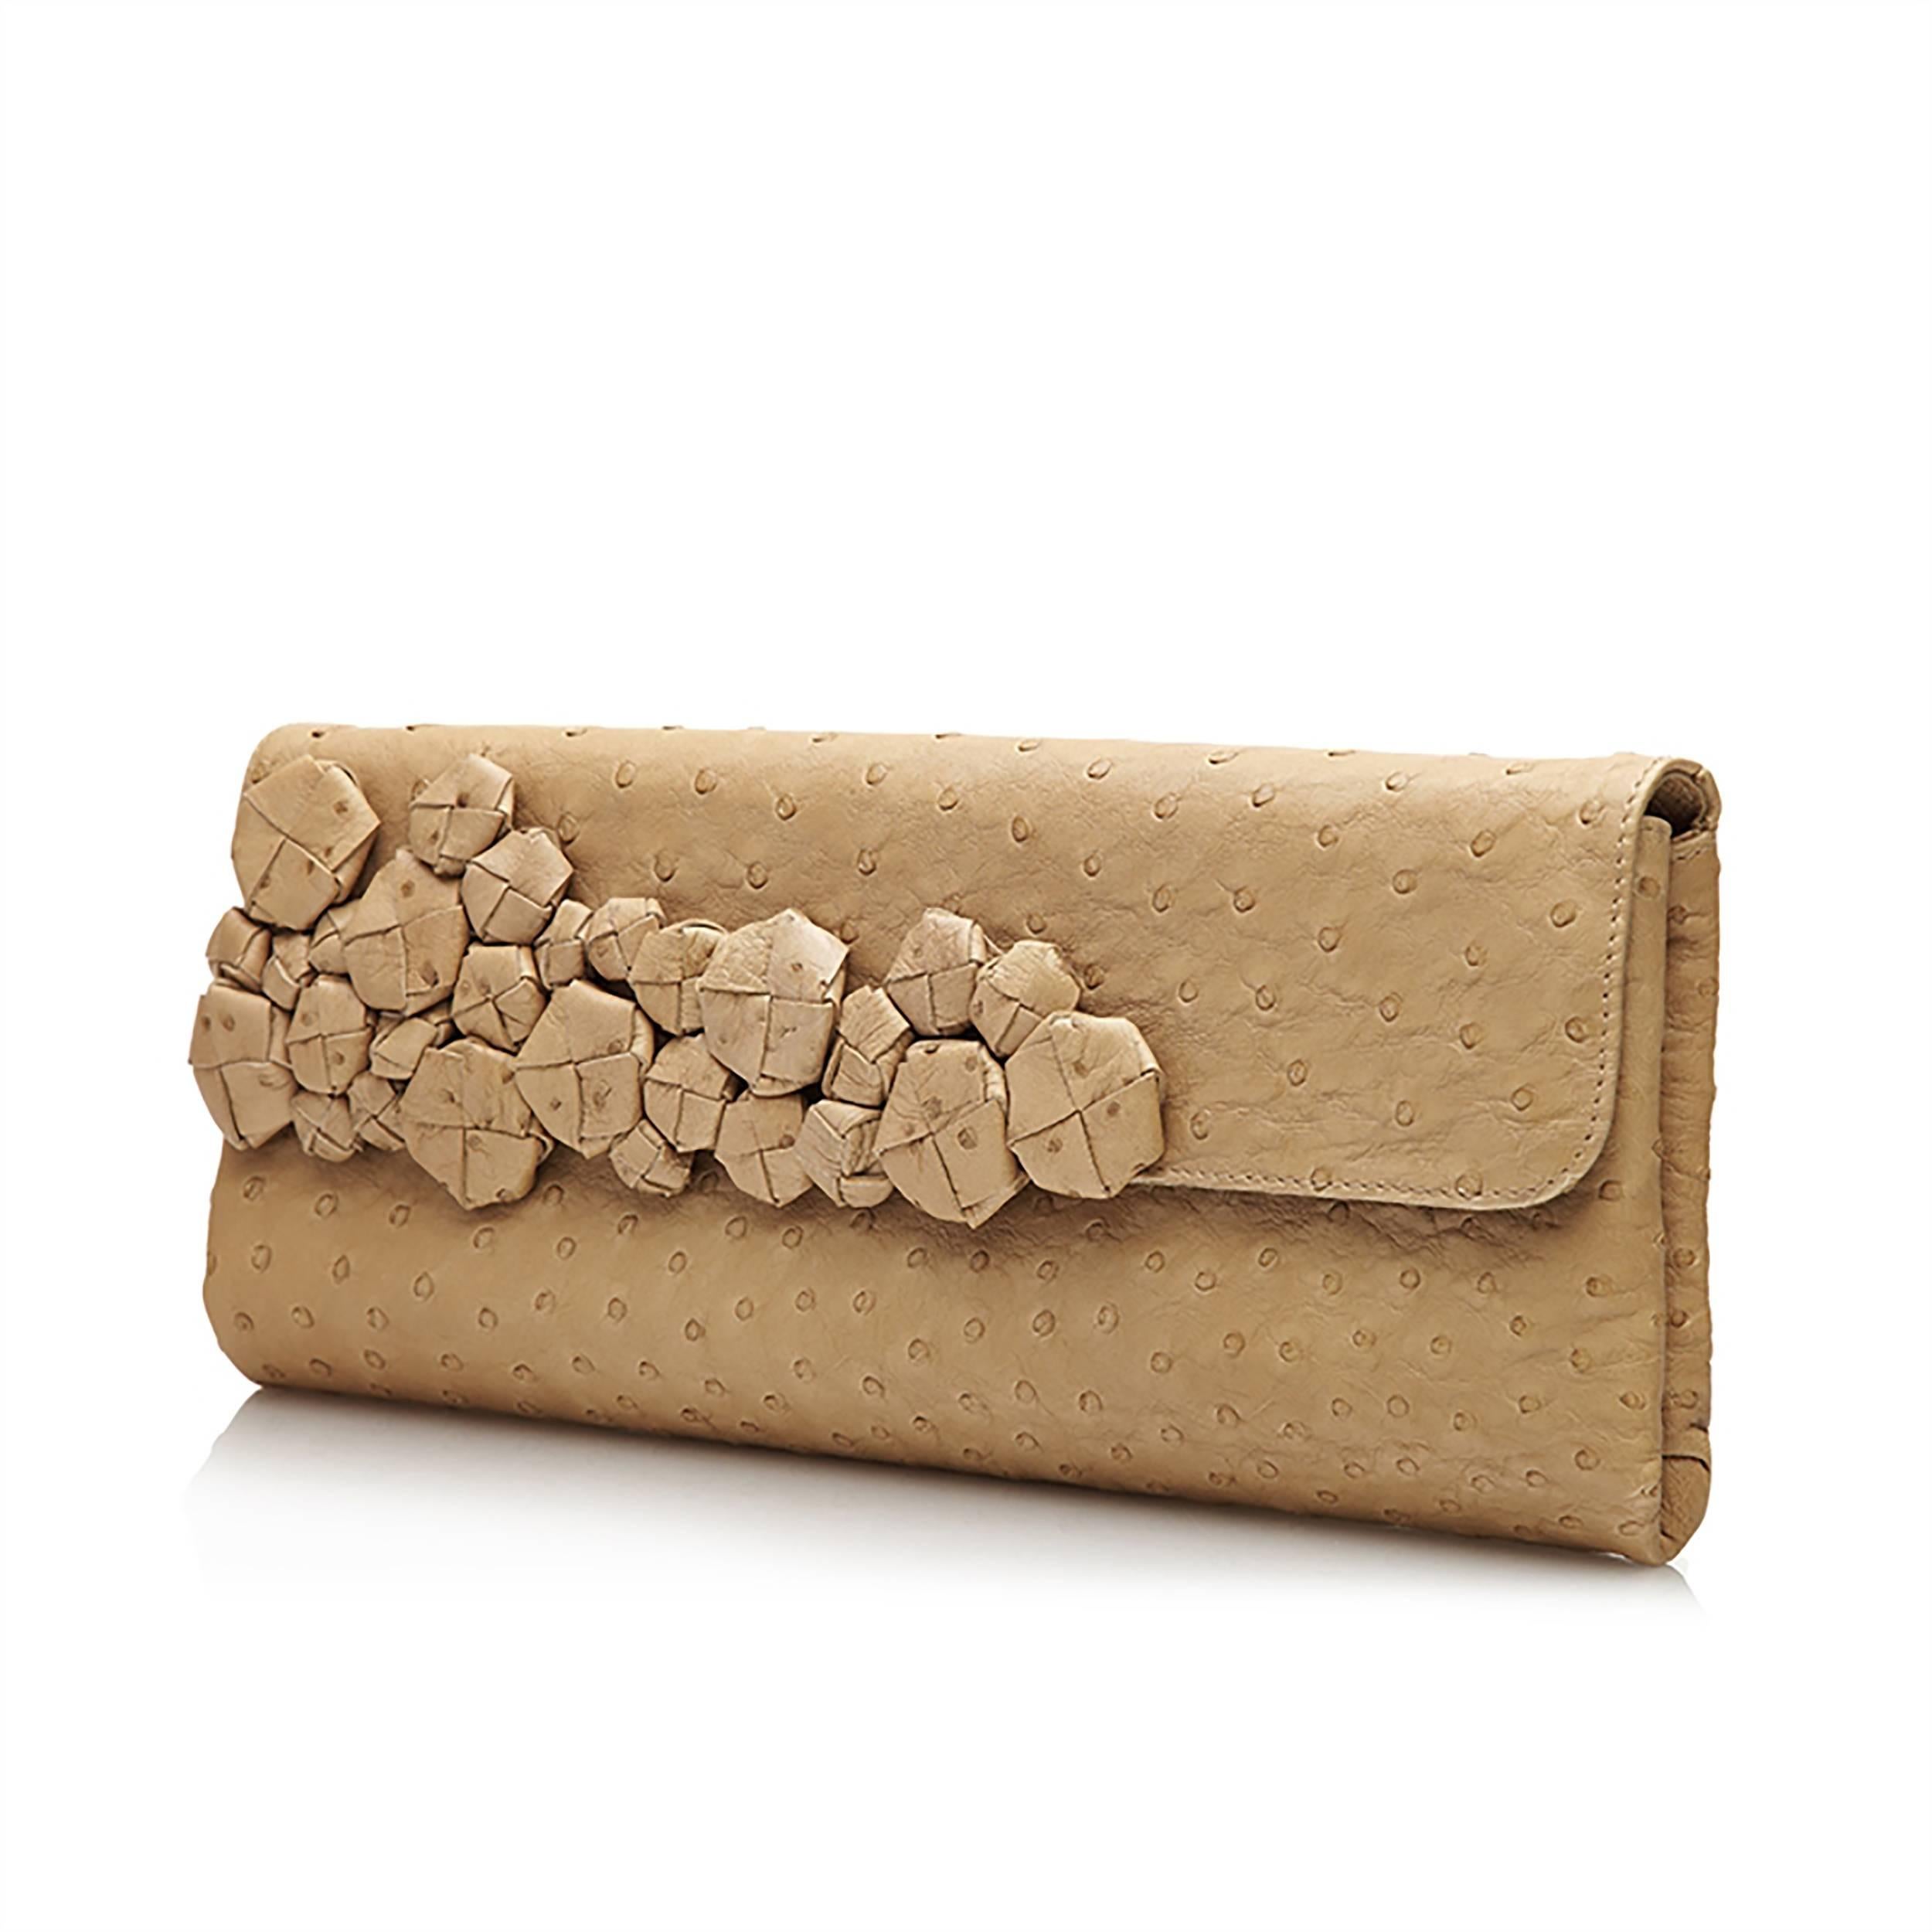 An exquisite envelope clutch by Bottega Veneta, the Italian fashion house so revered for its extraordinary quality of craftsmanship. This rare piece features a beige ostrich skin exterior. Among the most premium exotic leathers, ostrich skin is